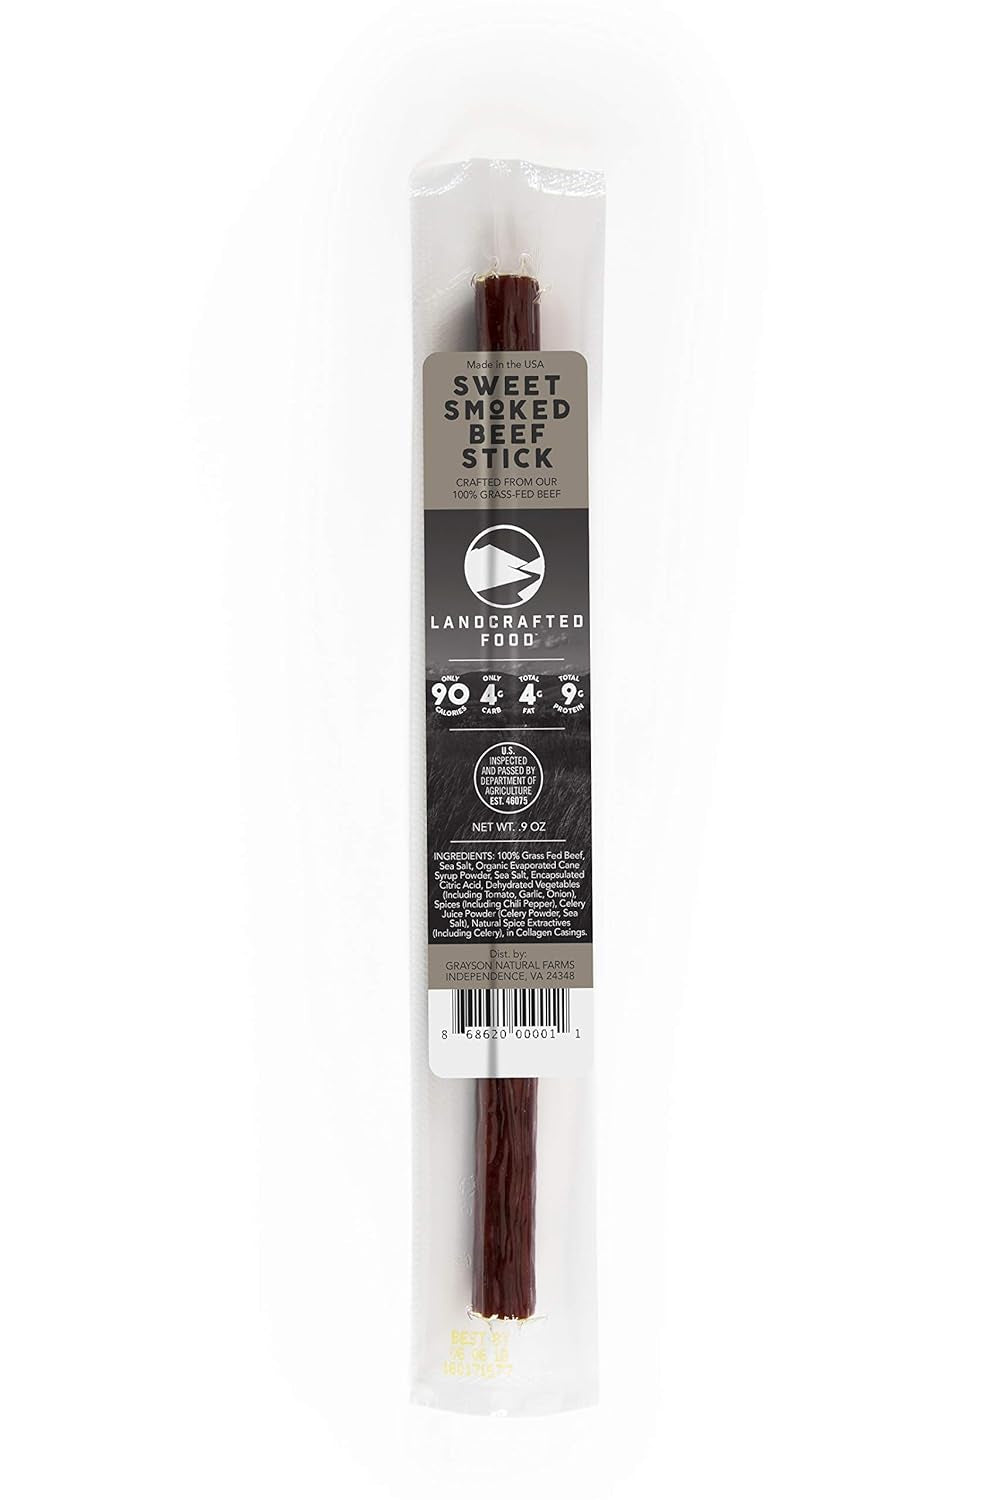 | 100% Grass Fed Beef Jerky Sticks - 20 Individually Wrapped .9 Ounce Stick Snack Packs - Farmer Owned, Hormone Free, High Protein with Low Carbs (Sweet Smoked)